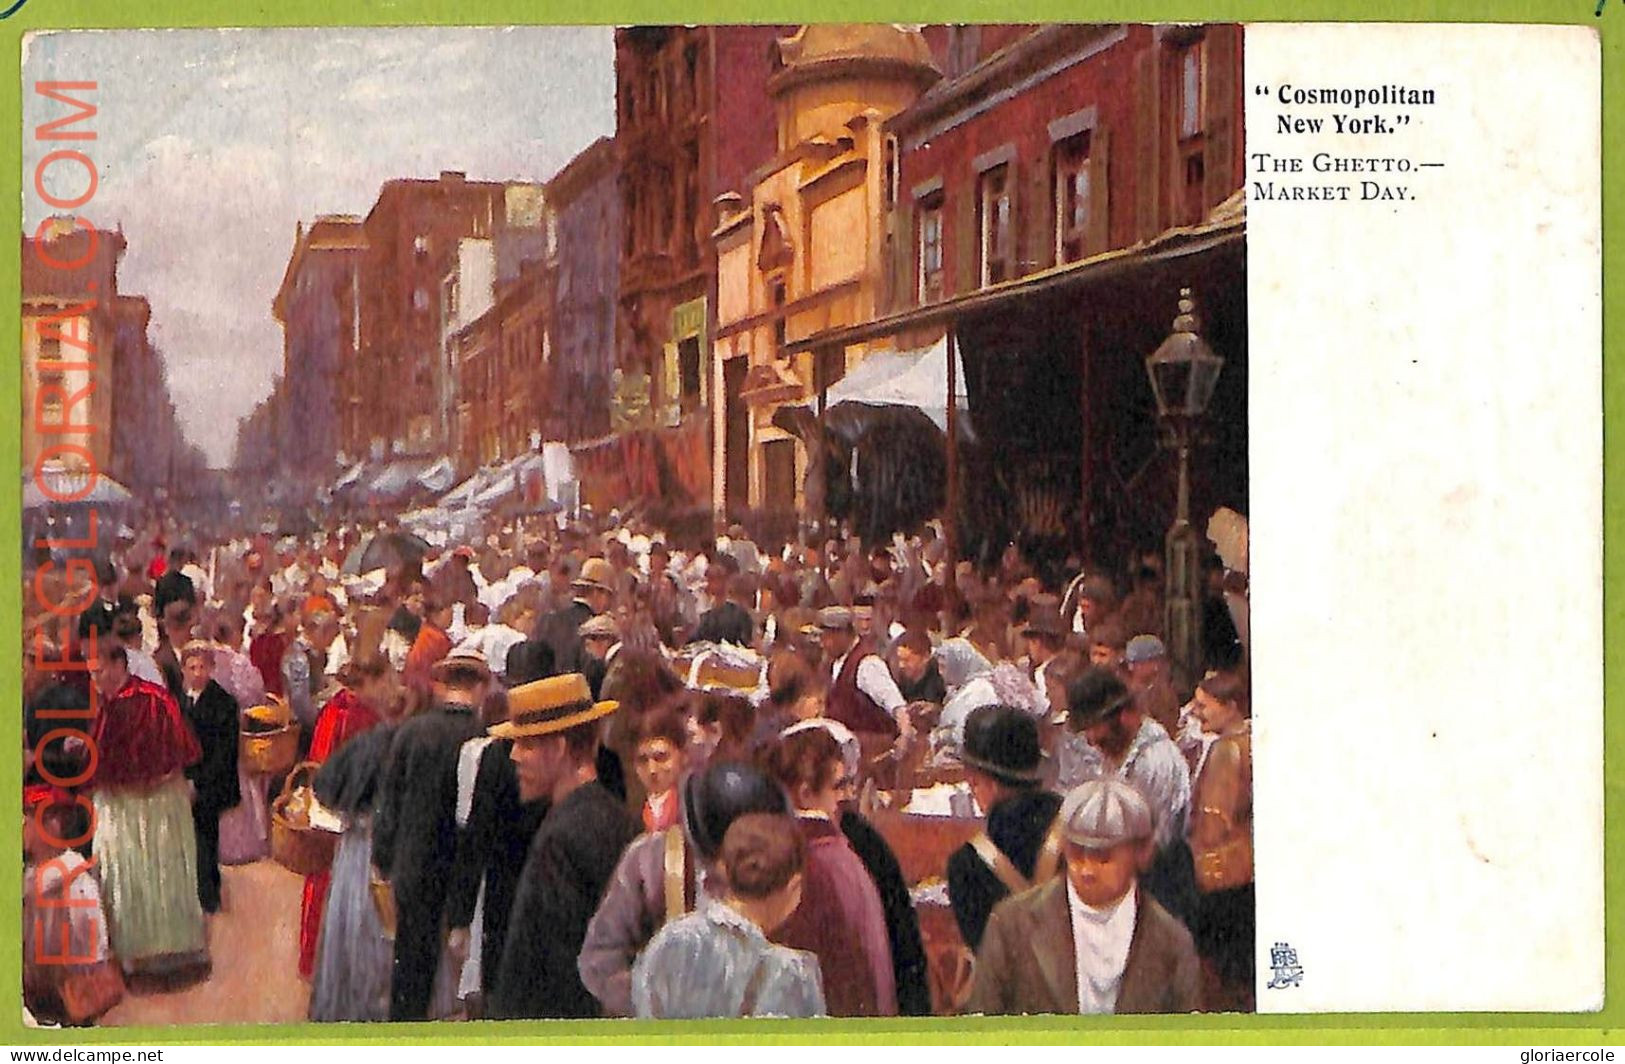 Af3578 - JUDAICA Vintage Postcard: USA - New York - The Ghetto - Market Day - Other Monuments & Buildings